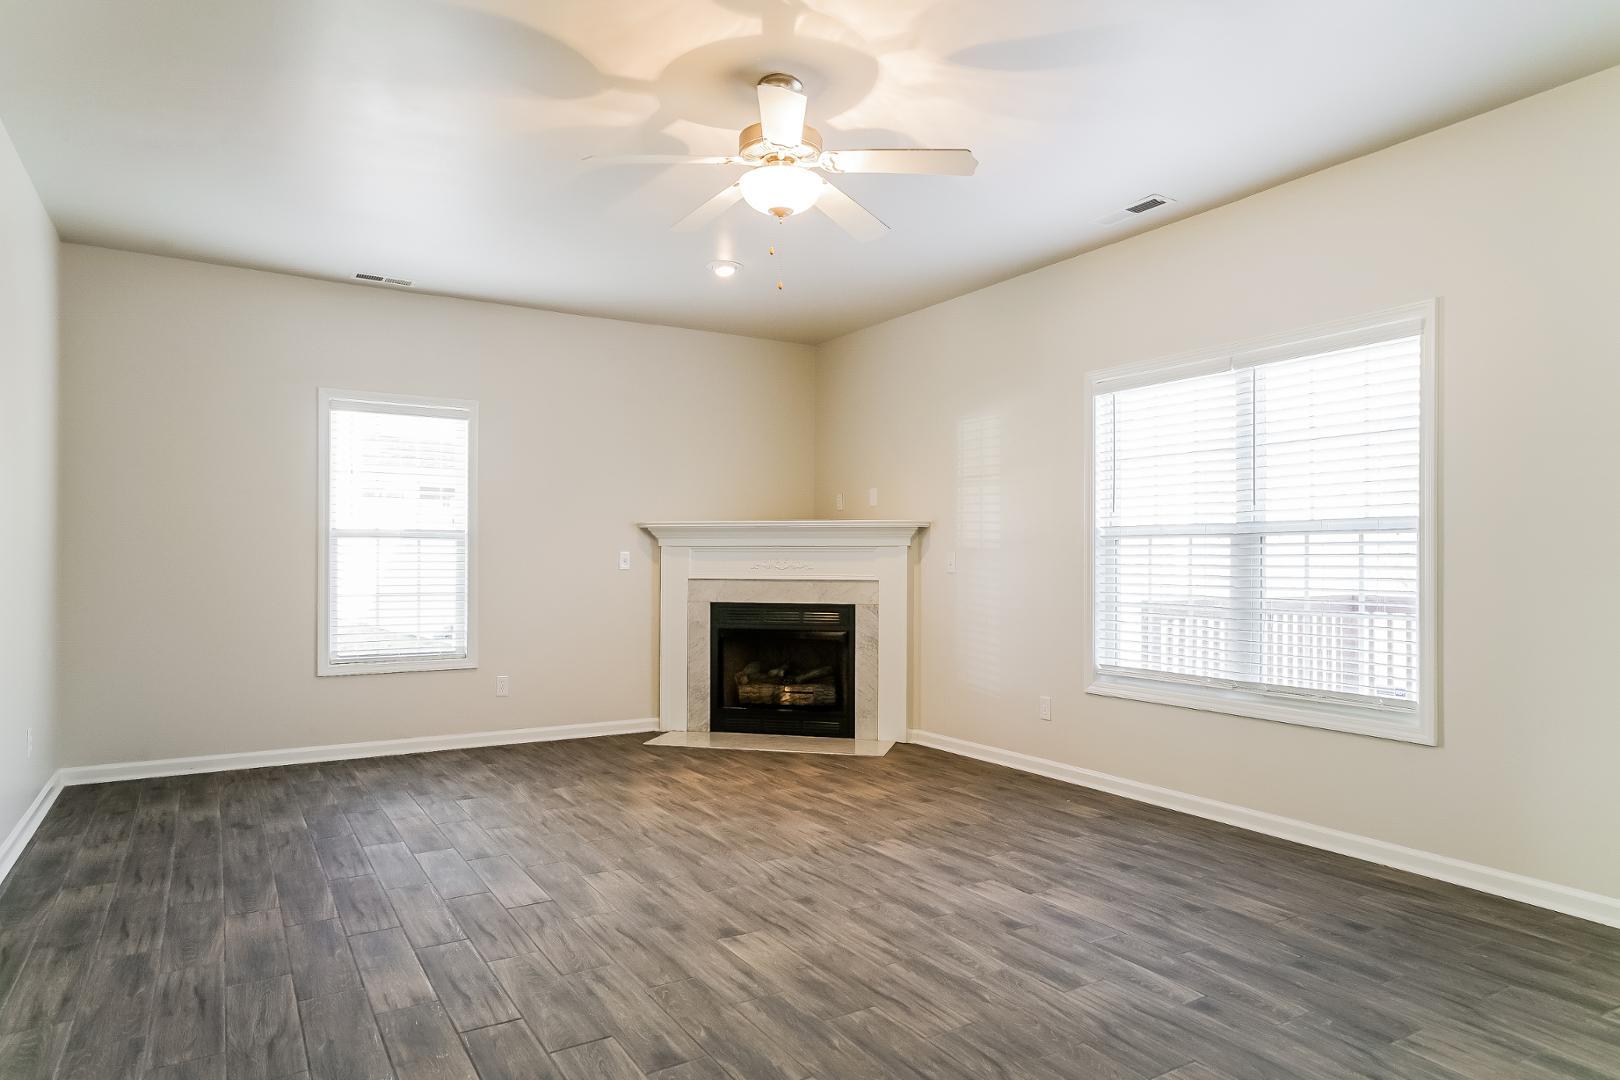 an empty room with windows fireplace and a wooden floor